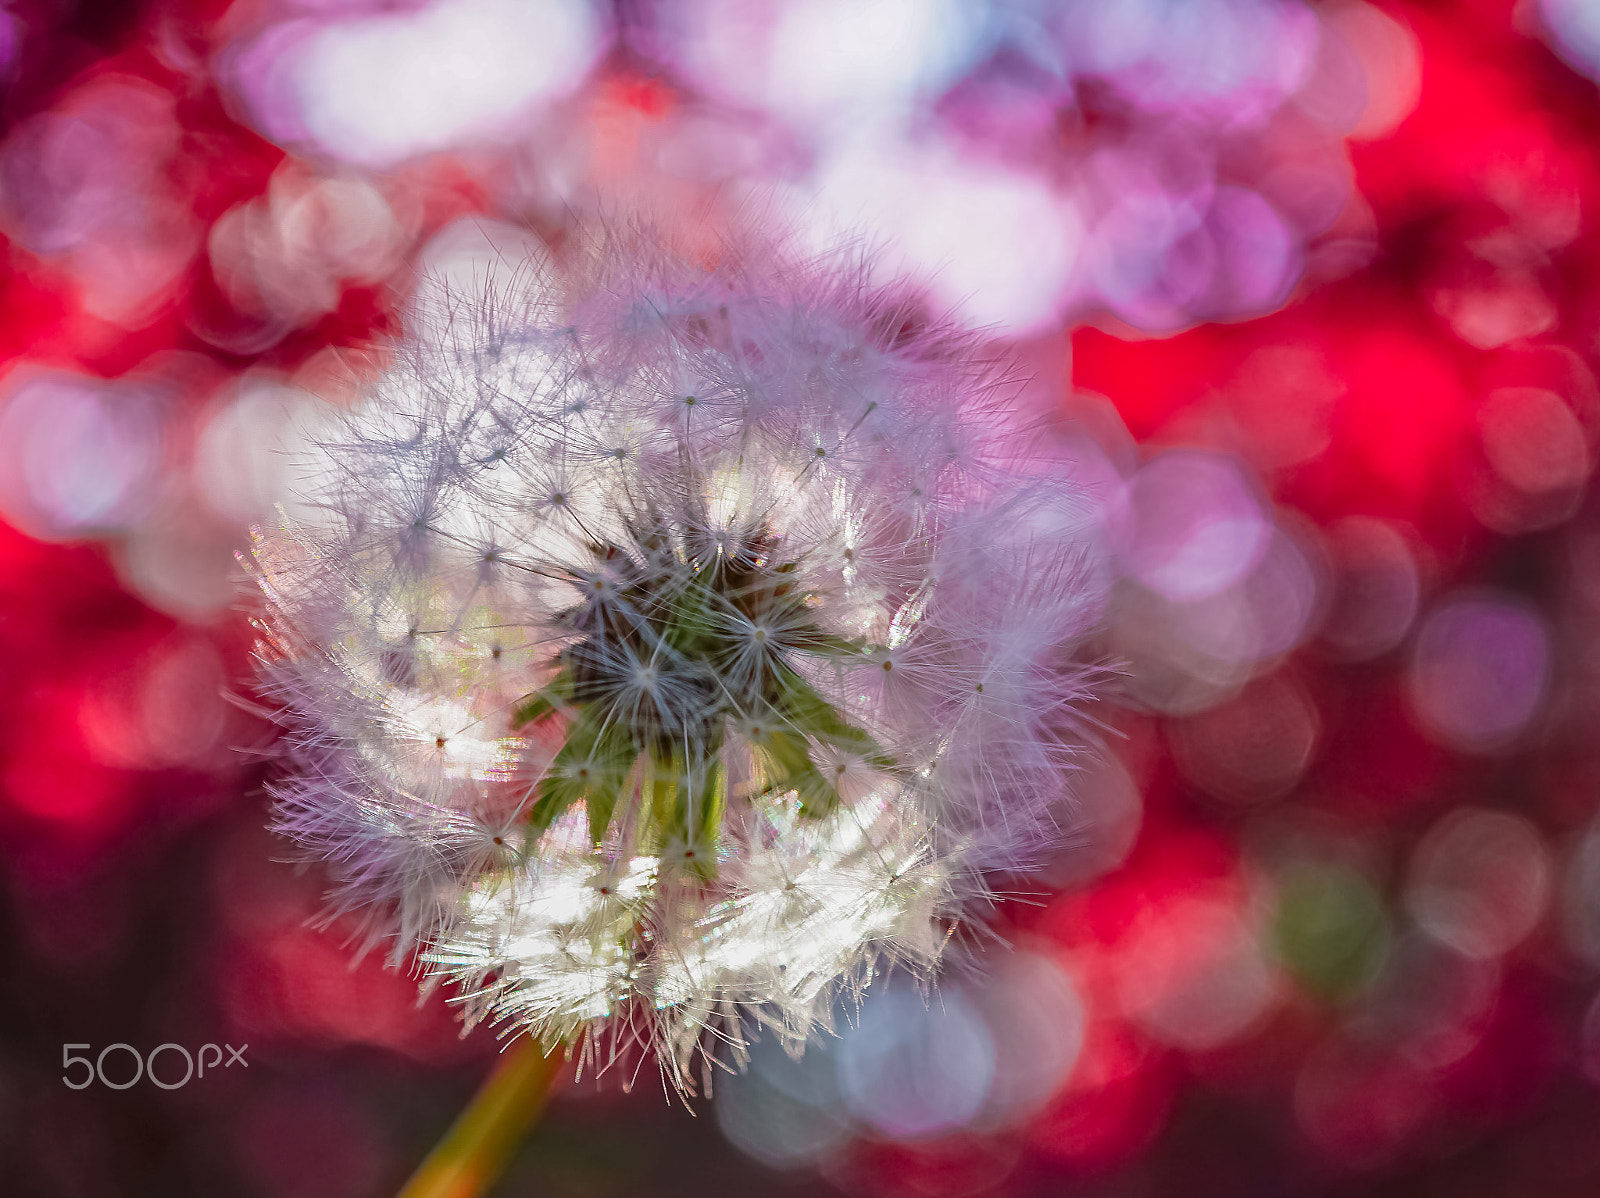 Sony a6300 sample photo. Dandelion puffball under red leaves photography